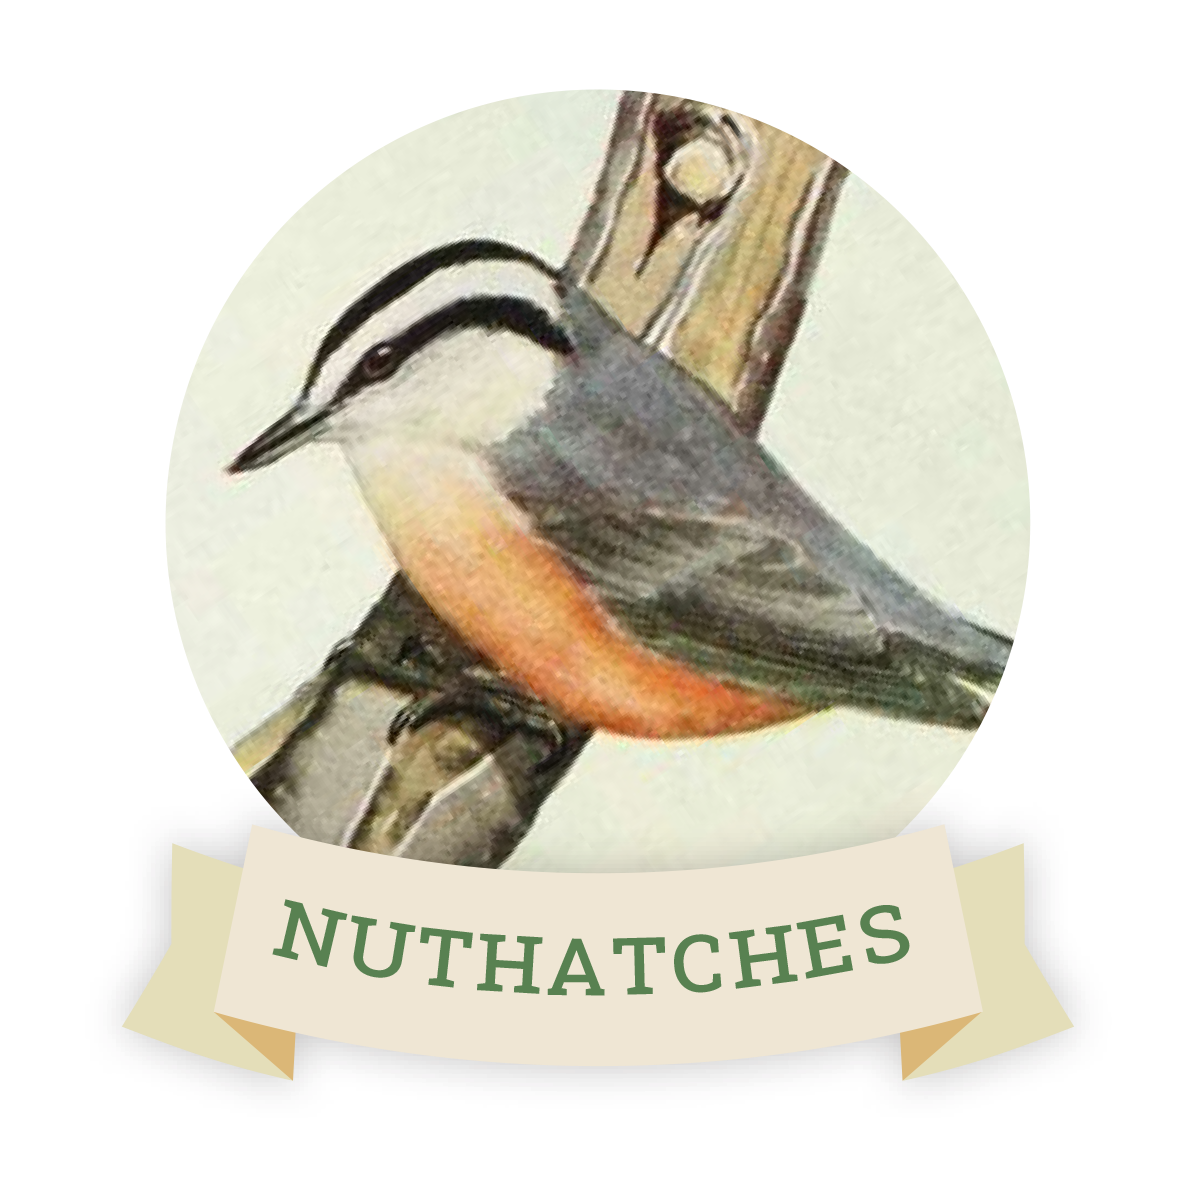 Image of a nuthatch. Links to nuthatch favorite food and feeders.